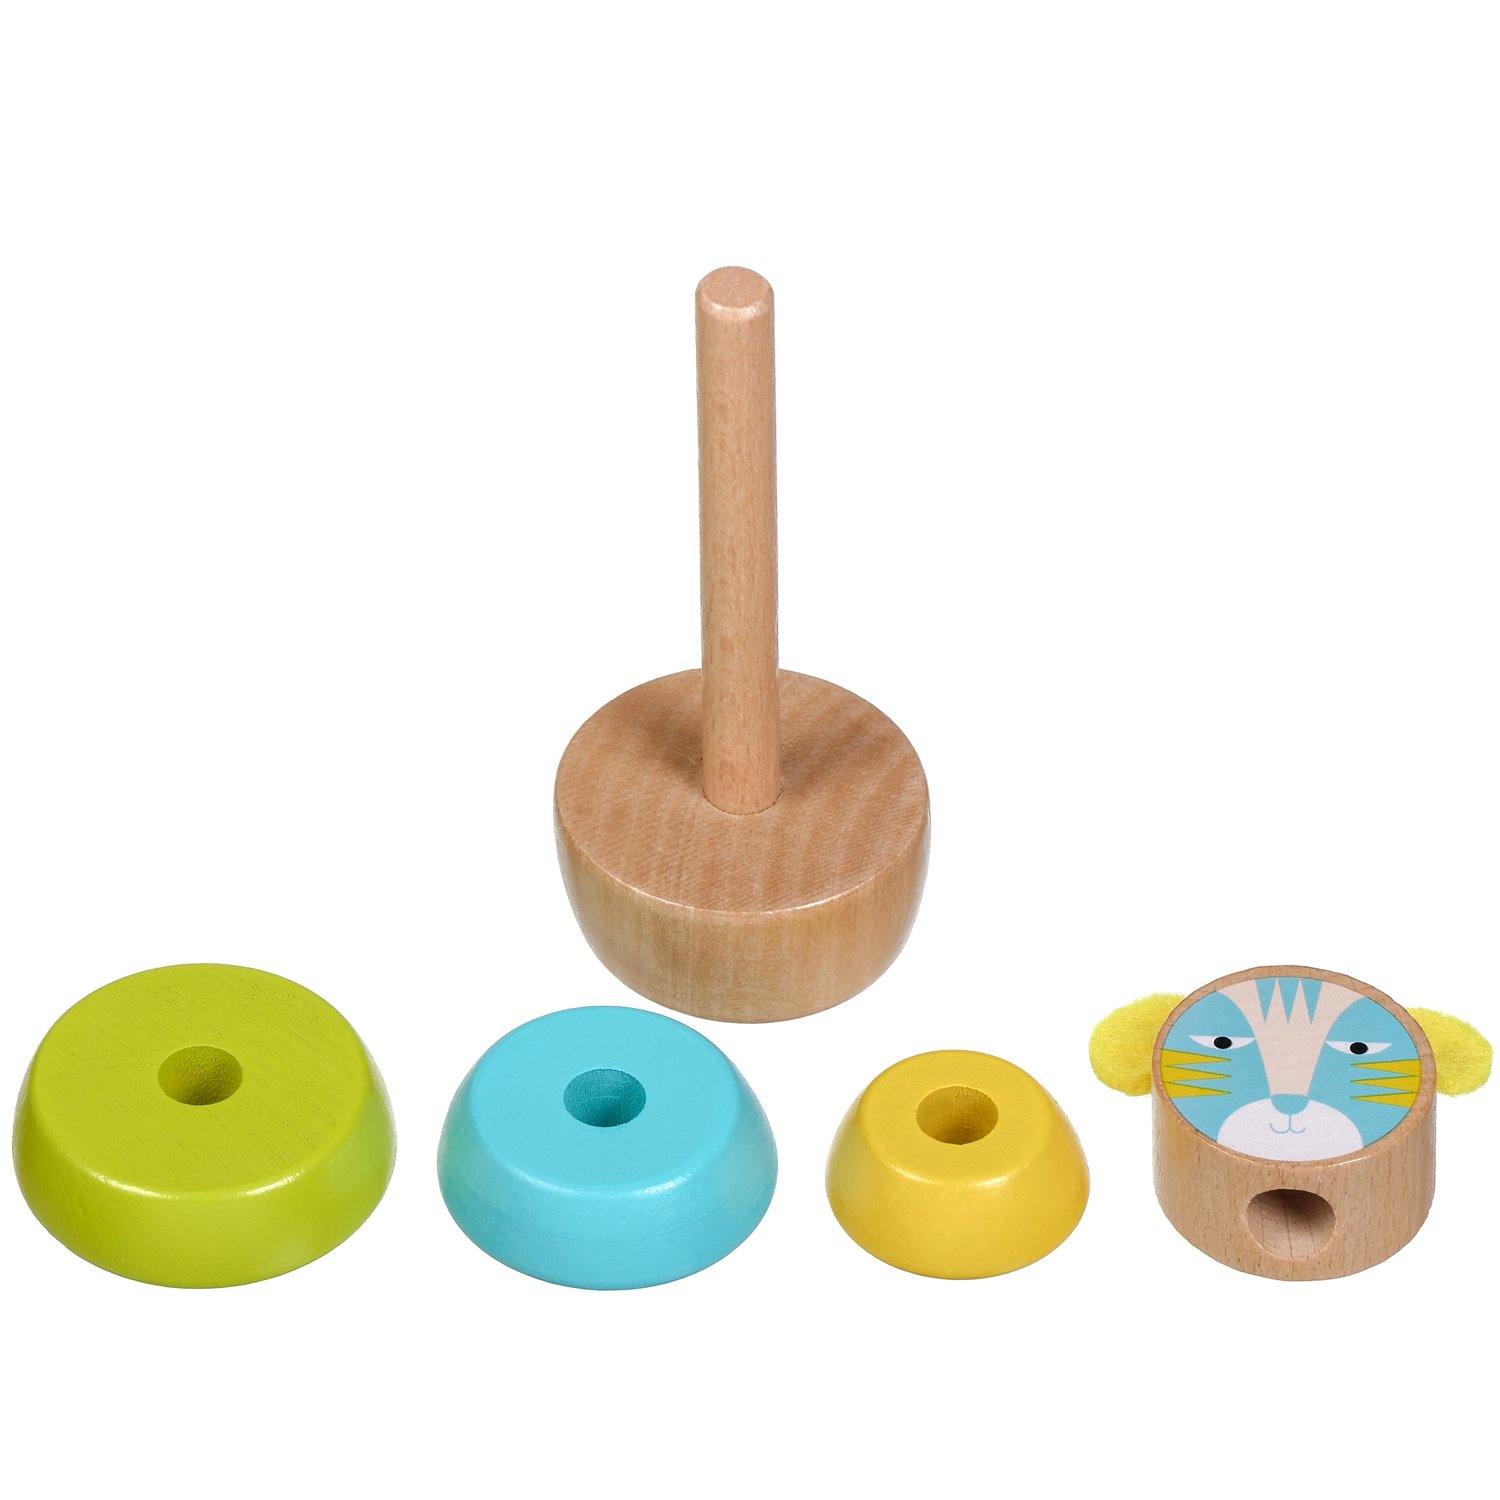 Cat stacker - educational wooden toy - T&M Toys